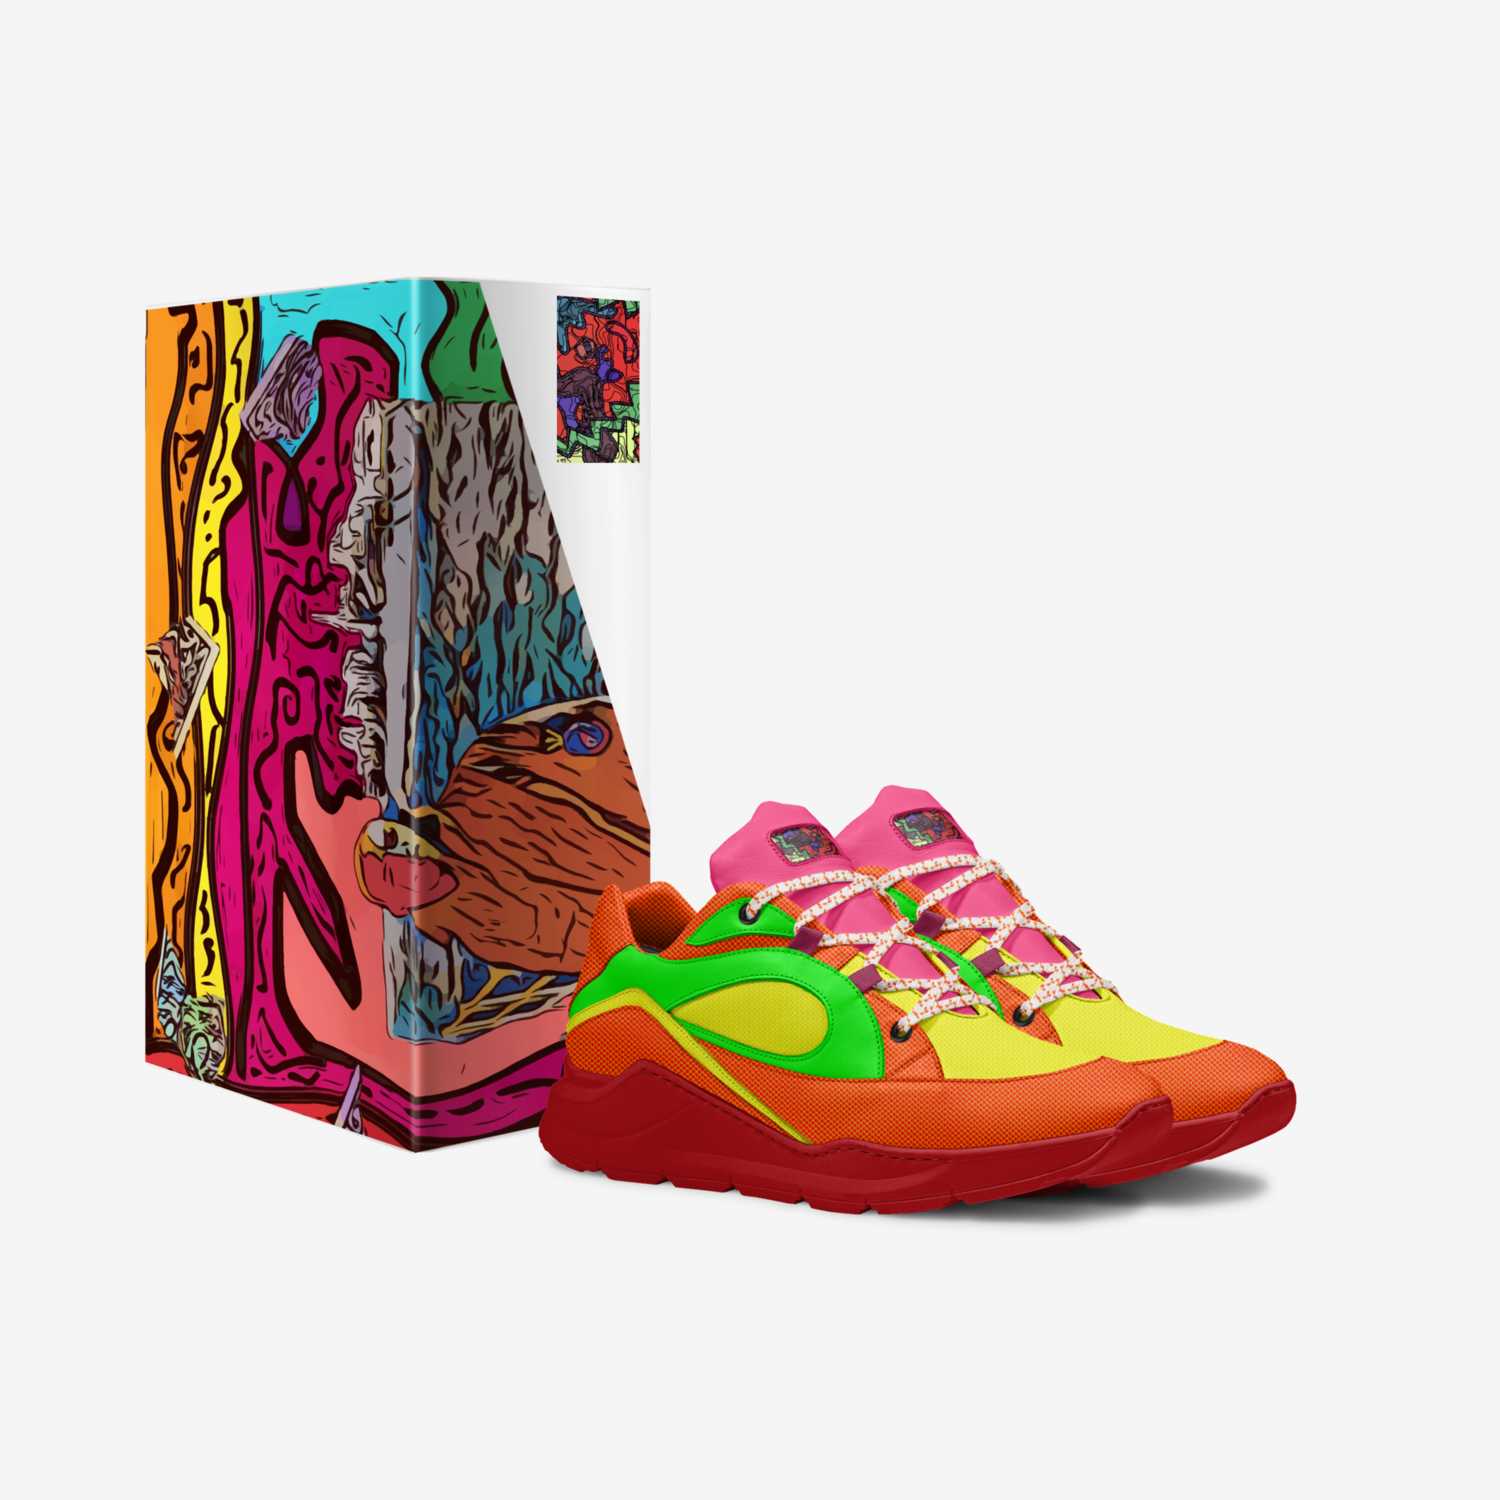 Color Therapy custom made in Italy shoes by Rashad Thompson | Box view